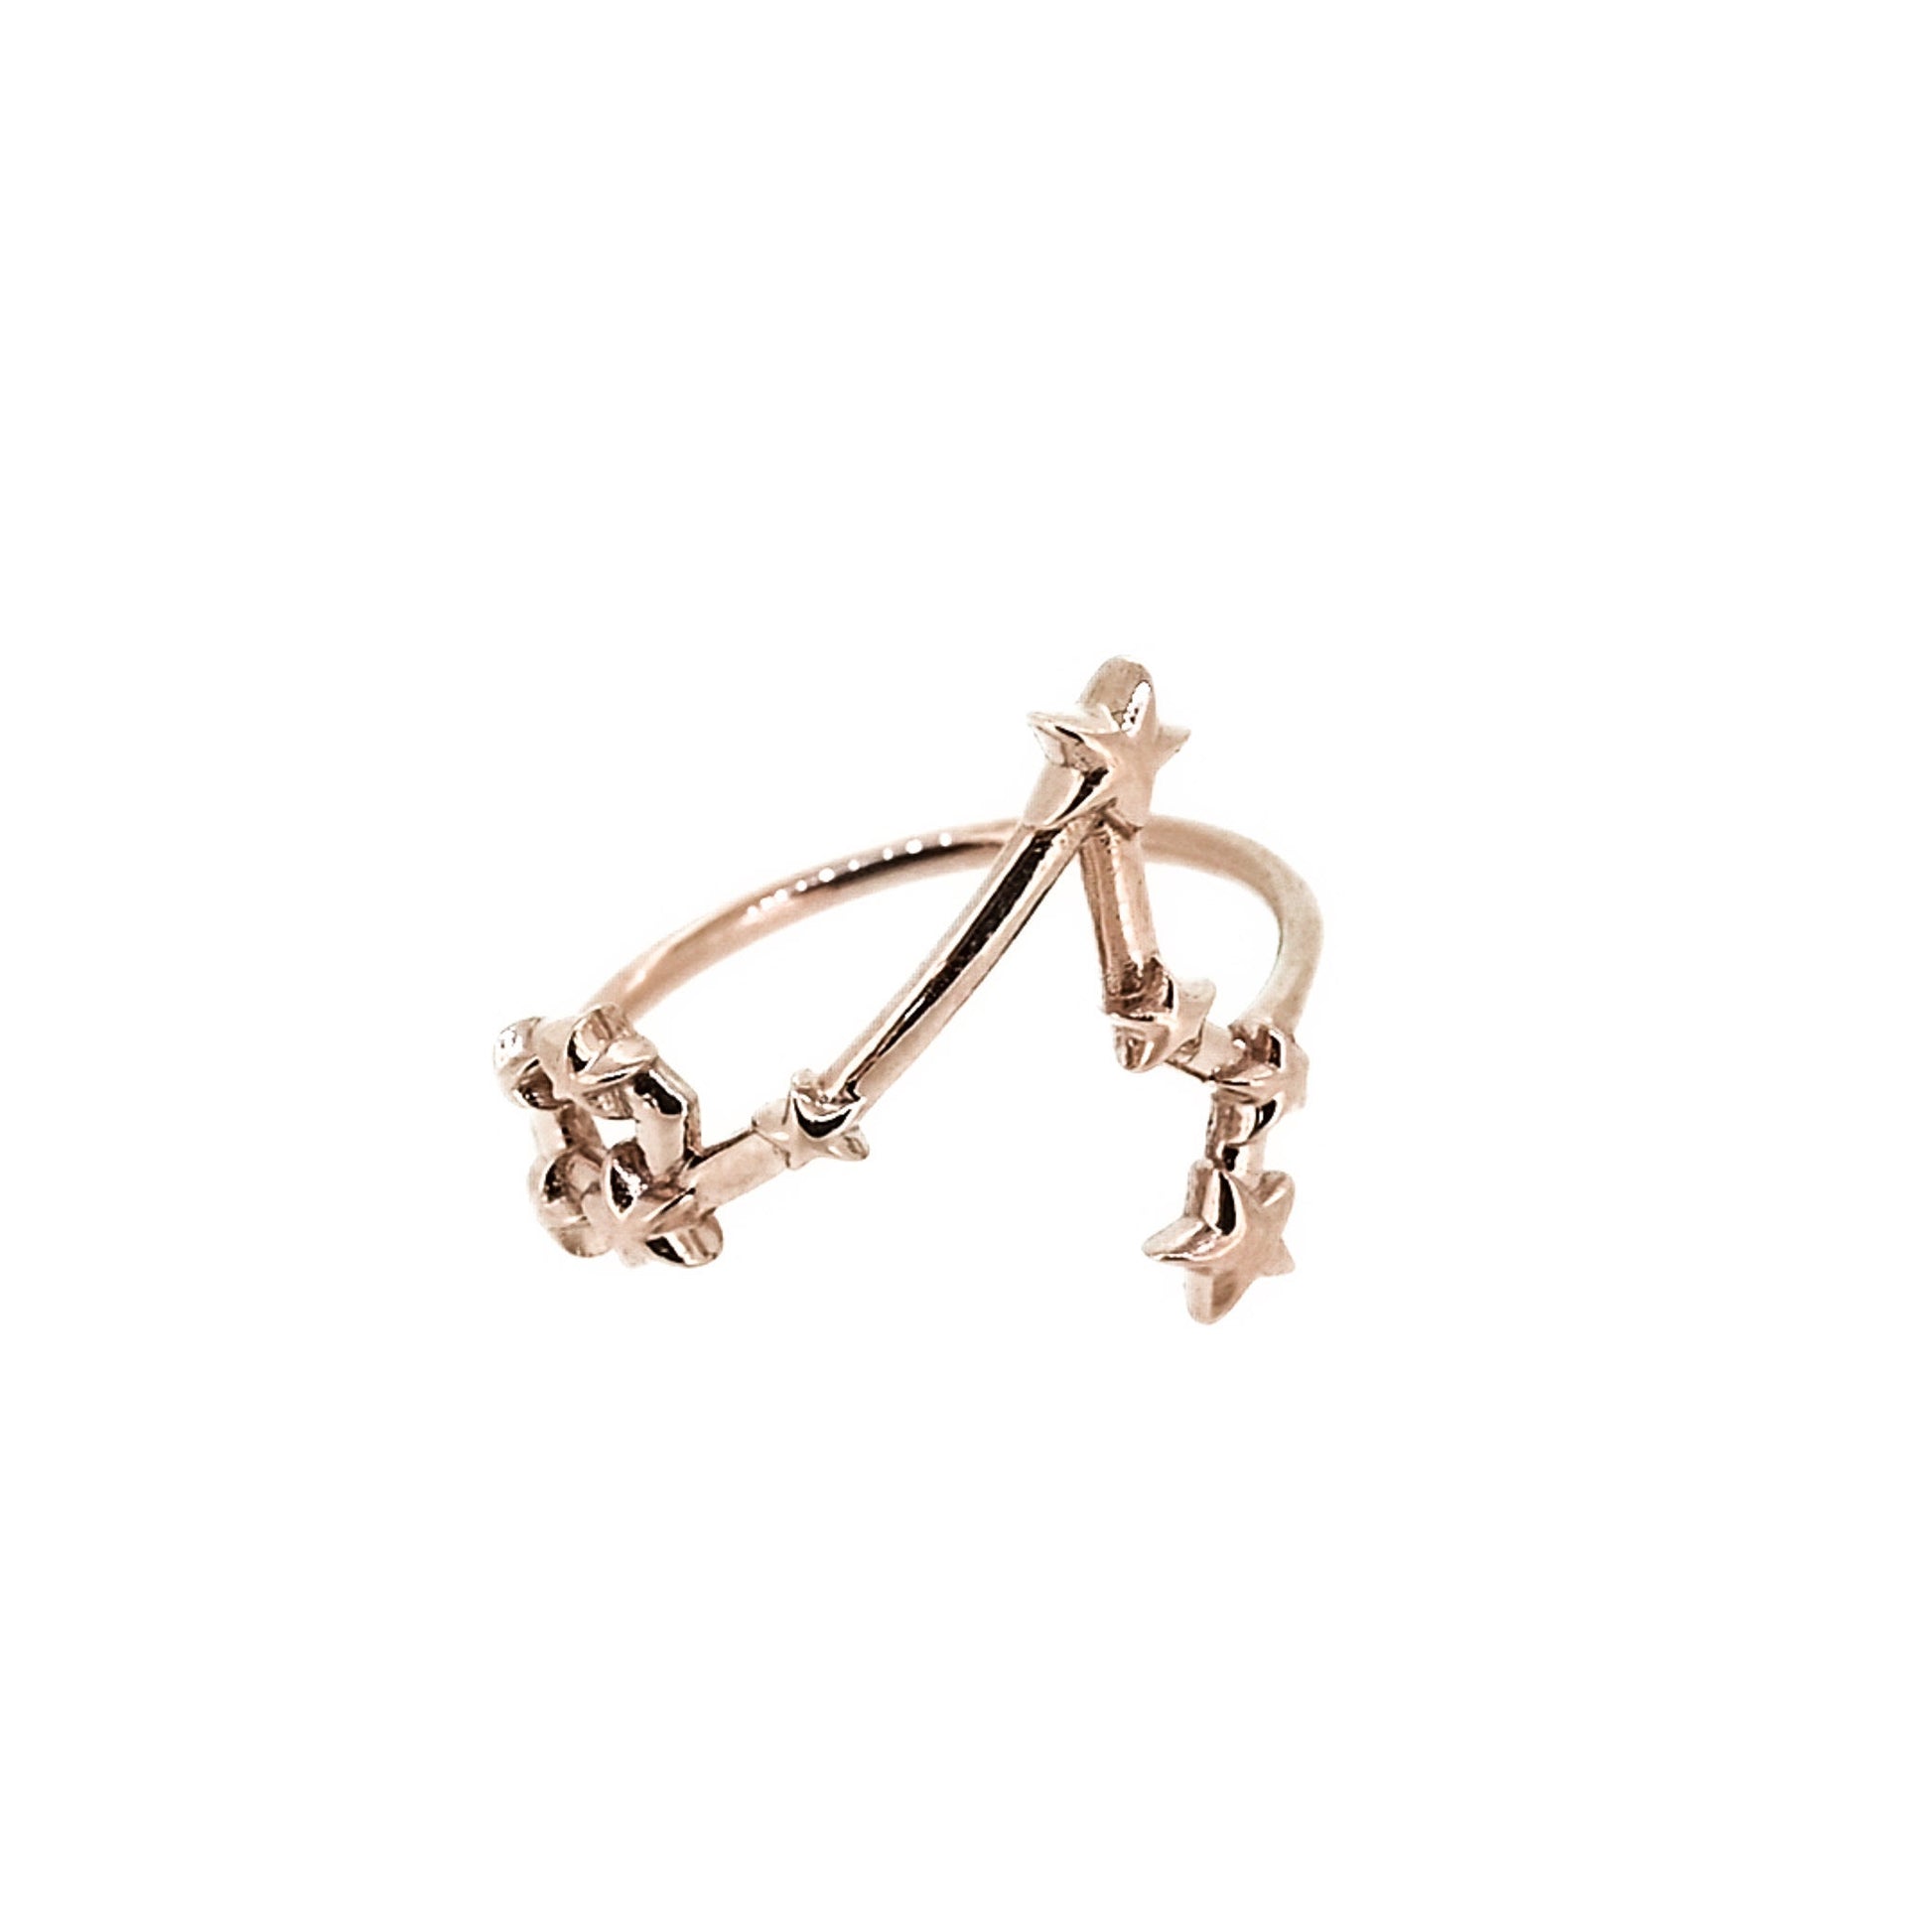 Solid Gold Pisces, Star Sign Dainty Celestial Zodiac Ring in solid 14K Yellow Gold, 14k White Gold, 14K Rose Gold